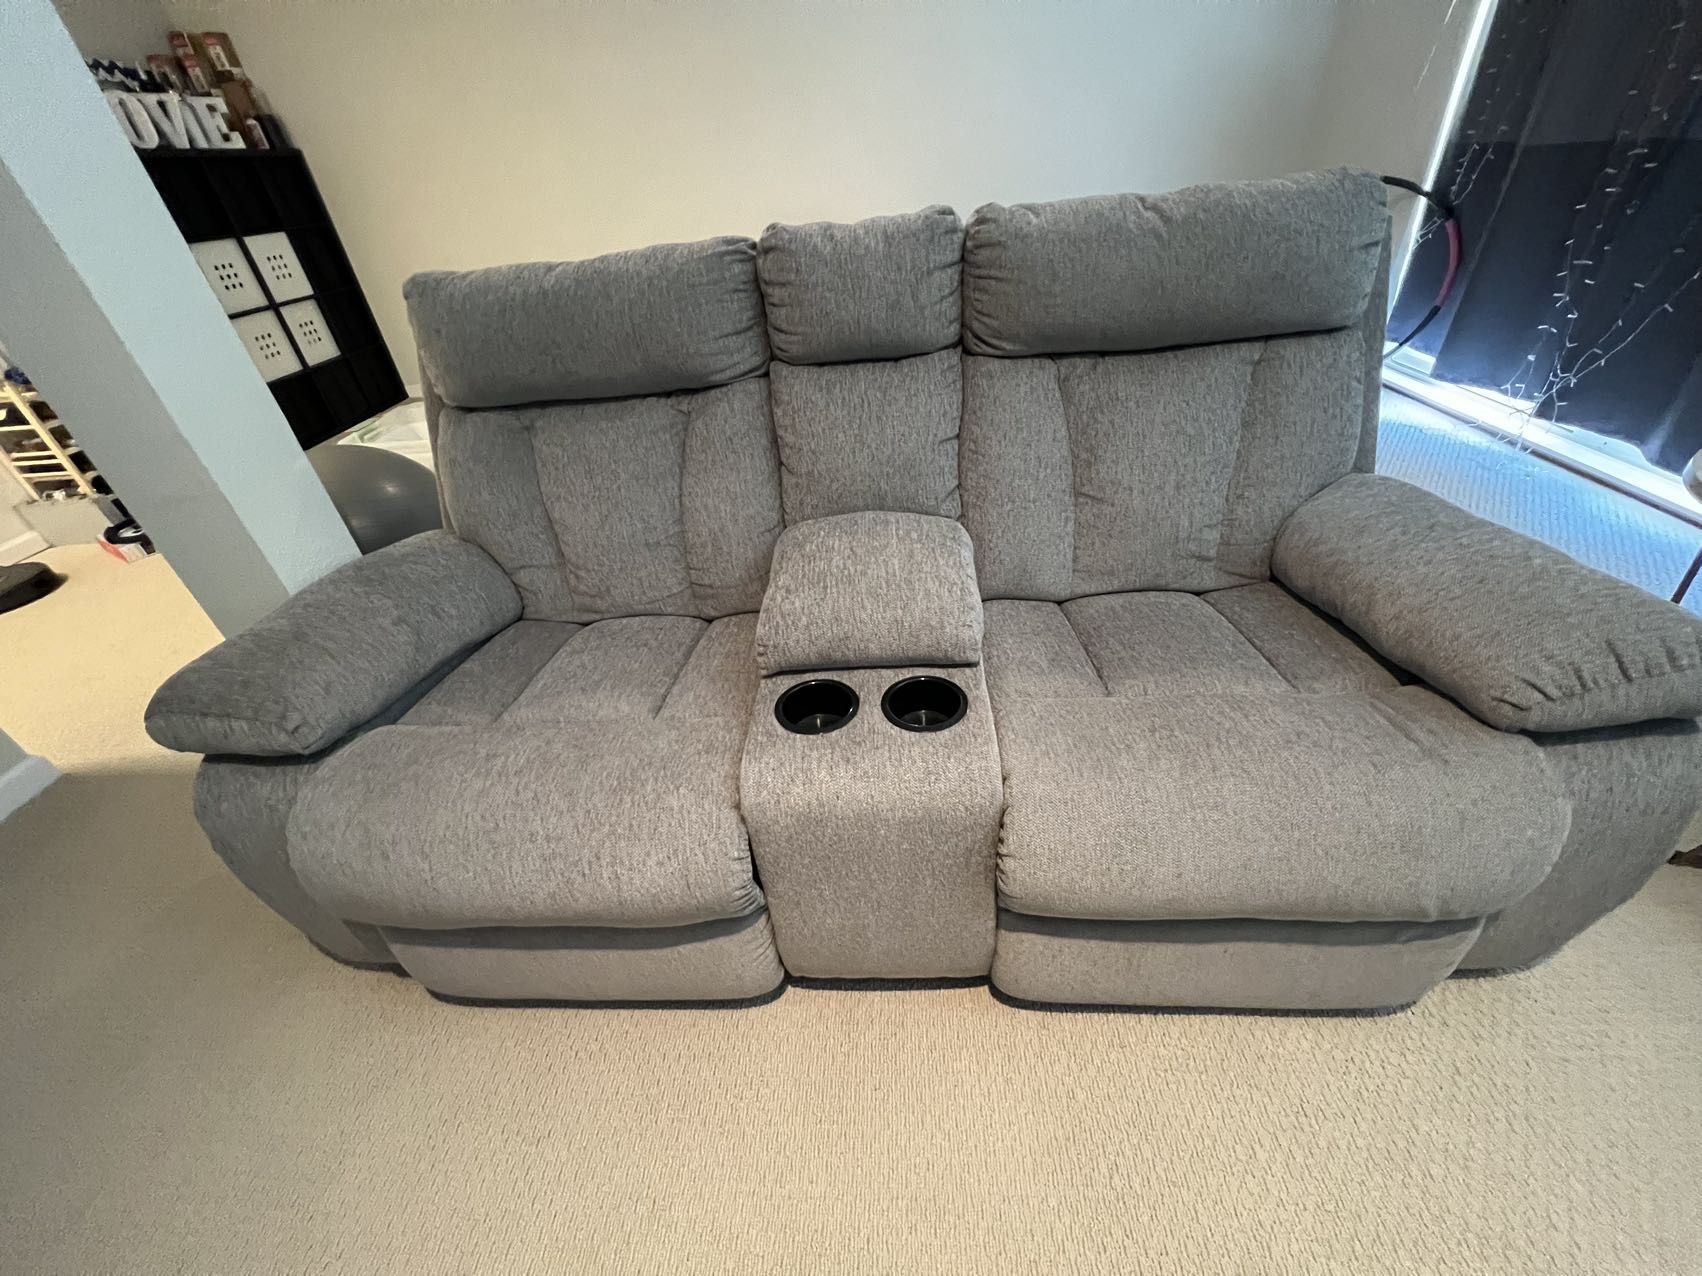 Reclining Sofa/Loveseat(a pair) two in total